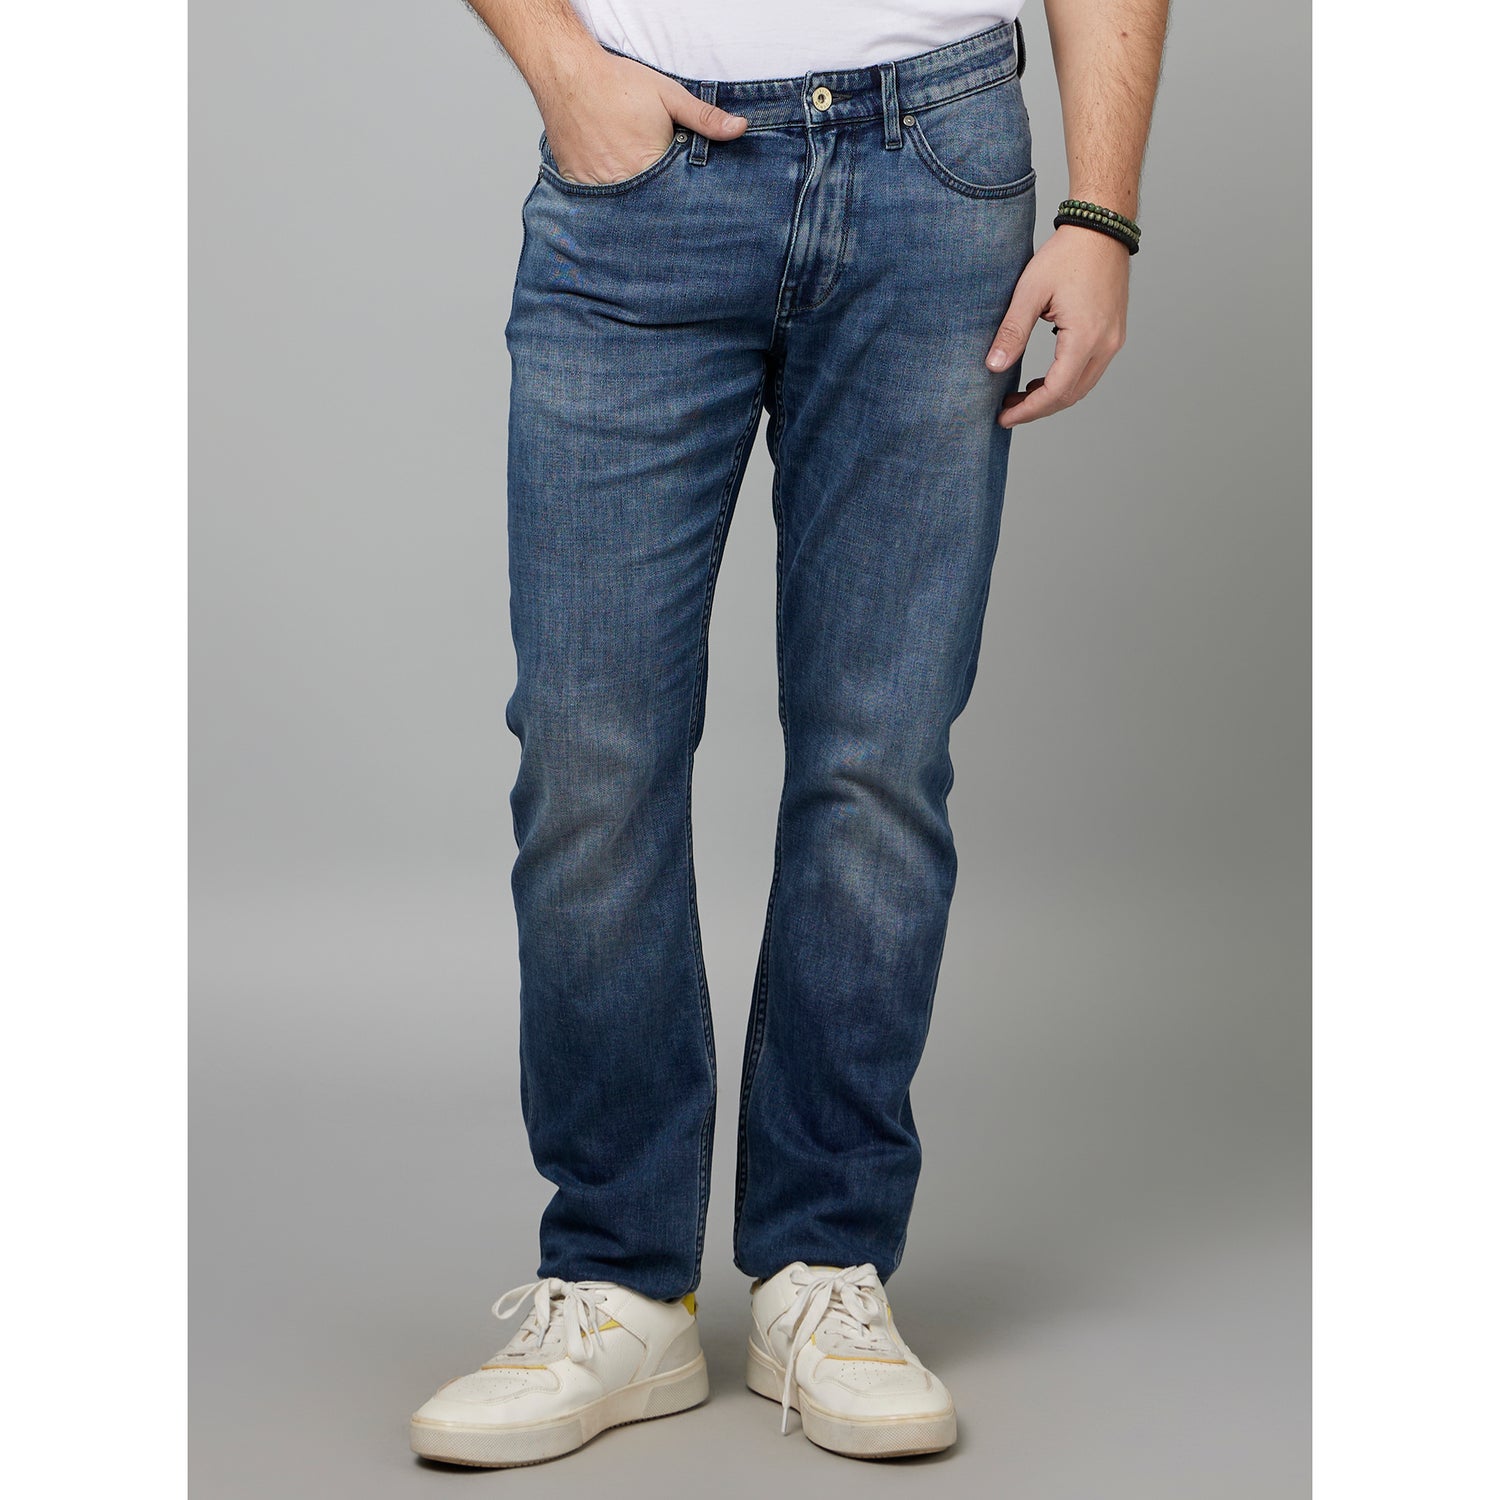 Navy Blue Slim Fit Clean Look Light Fade Clean Look Stretchable Jeans (FOSOFT)